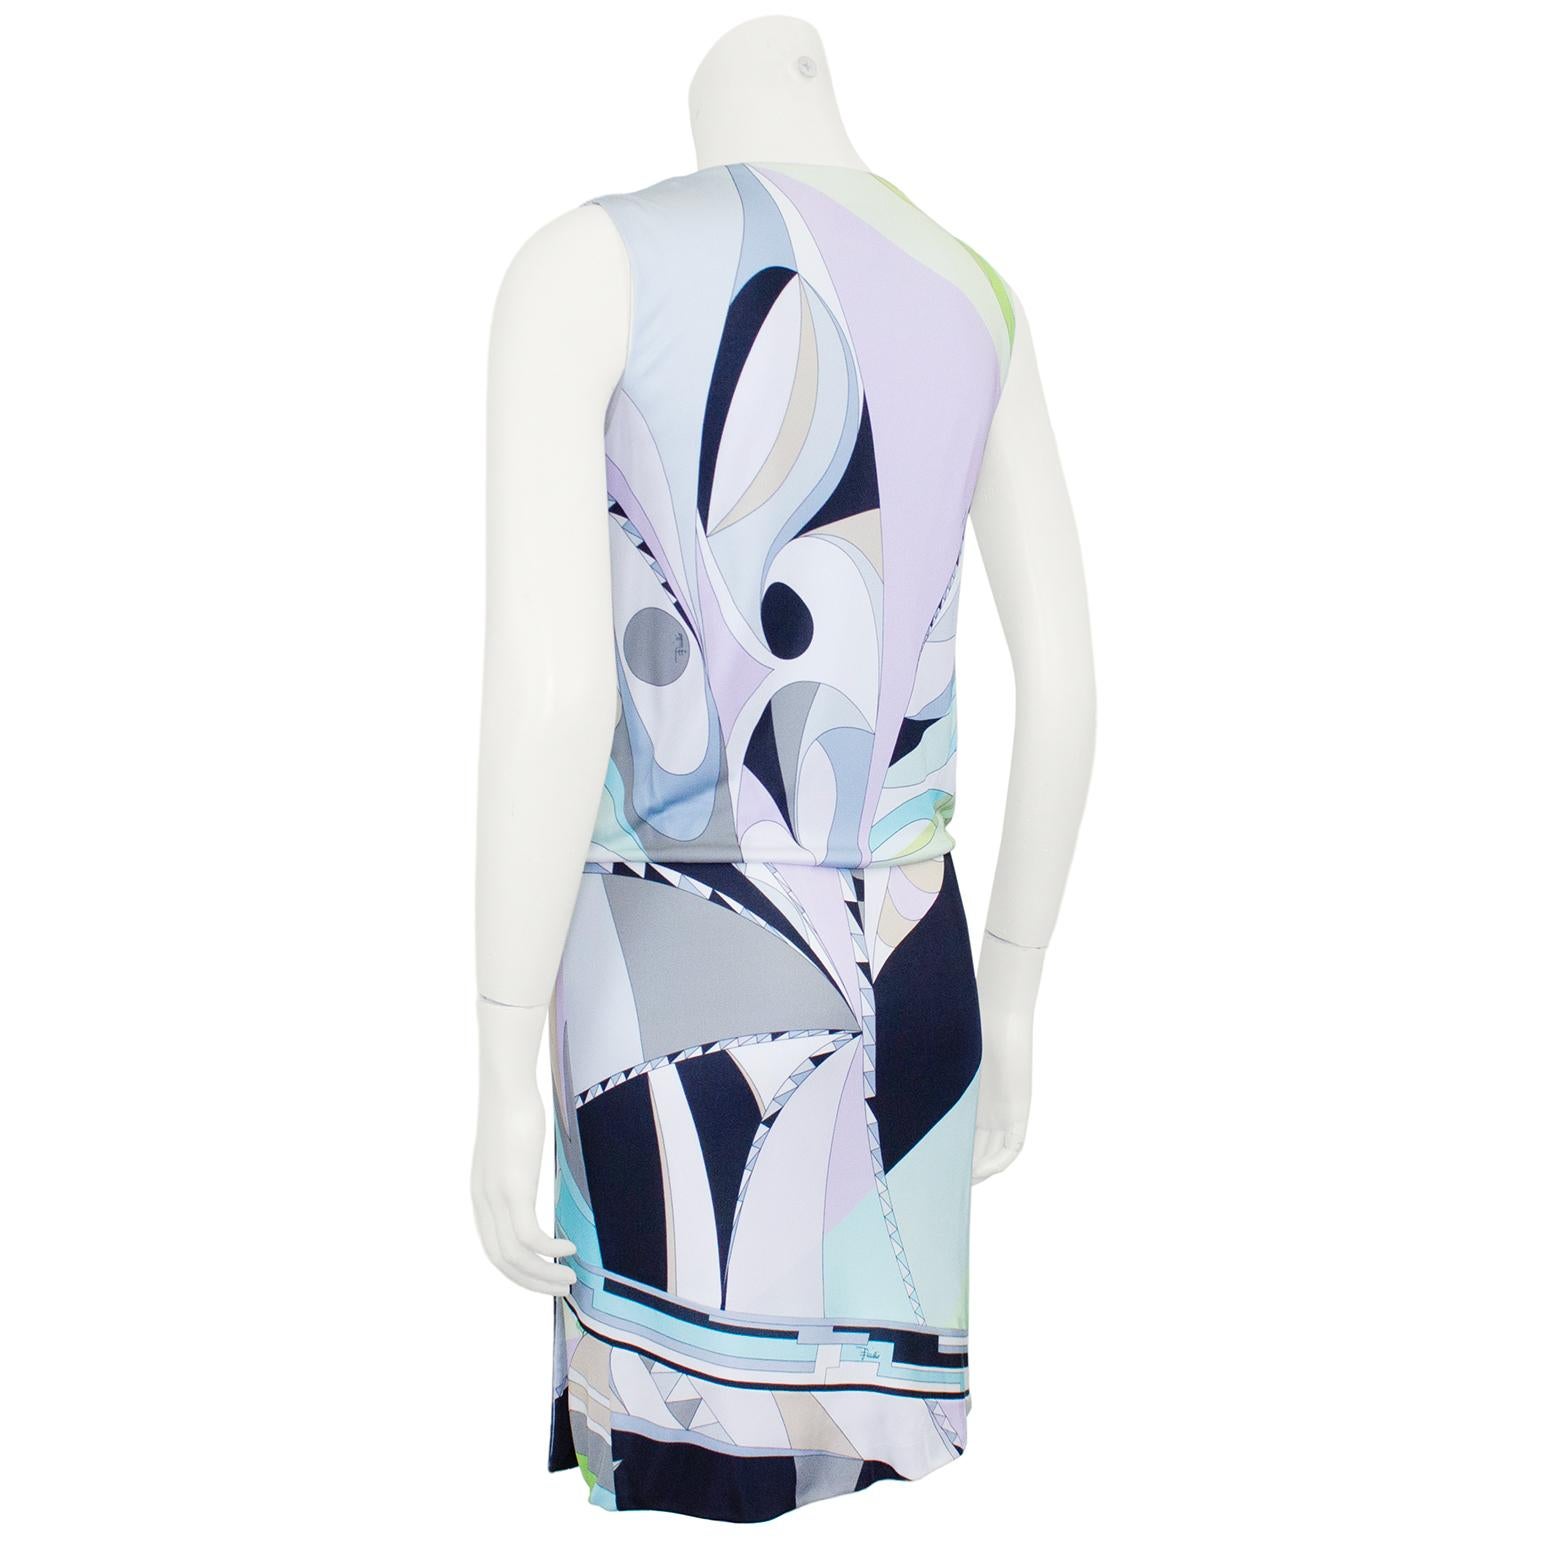 Early 2000s Emilio Pucci Printed Dress  In Good Condition For Sale In Toronto, Ontario